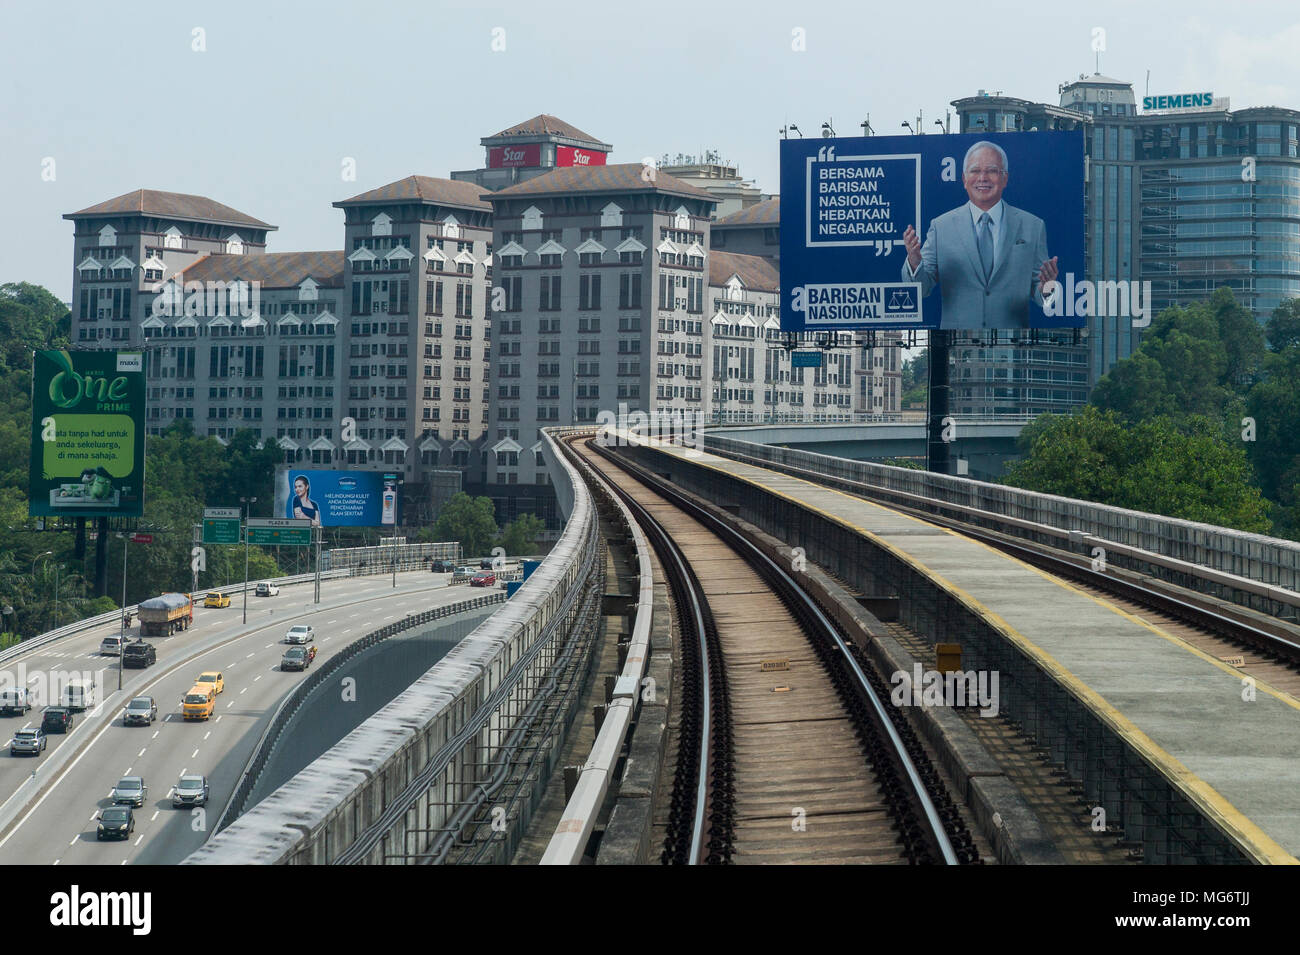 A huge billboard with the image of Malaysian prime minister, Najib Razak of the Barisan National Party is seen in the background ahead of the 14th general election in Kuala Lumpur, Malaysia on April 27, 2018. According to supporters of Najib Razak, the MRT is one of the greatest achievements during the prime minister's term. The 14th general election of Malaysia will be held on May 9. Stock Photo